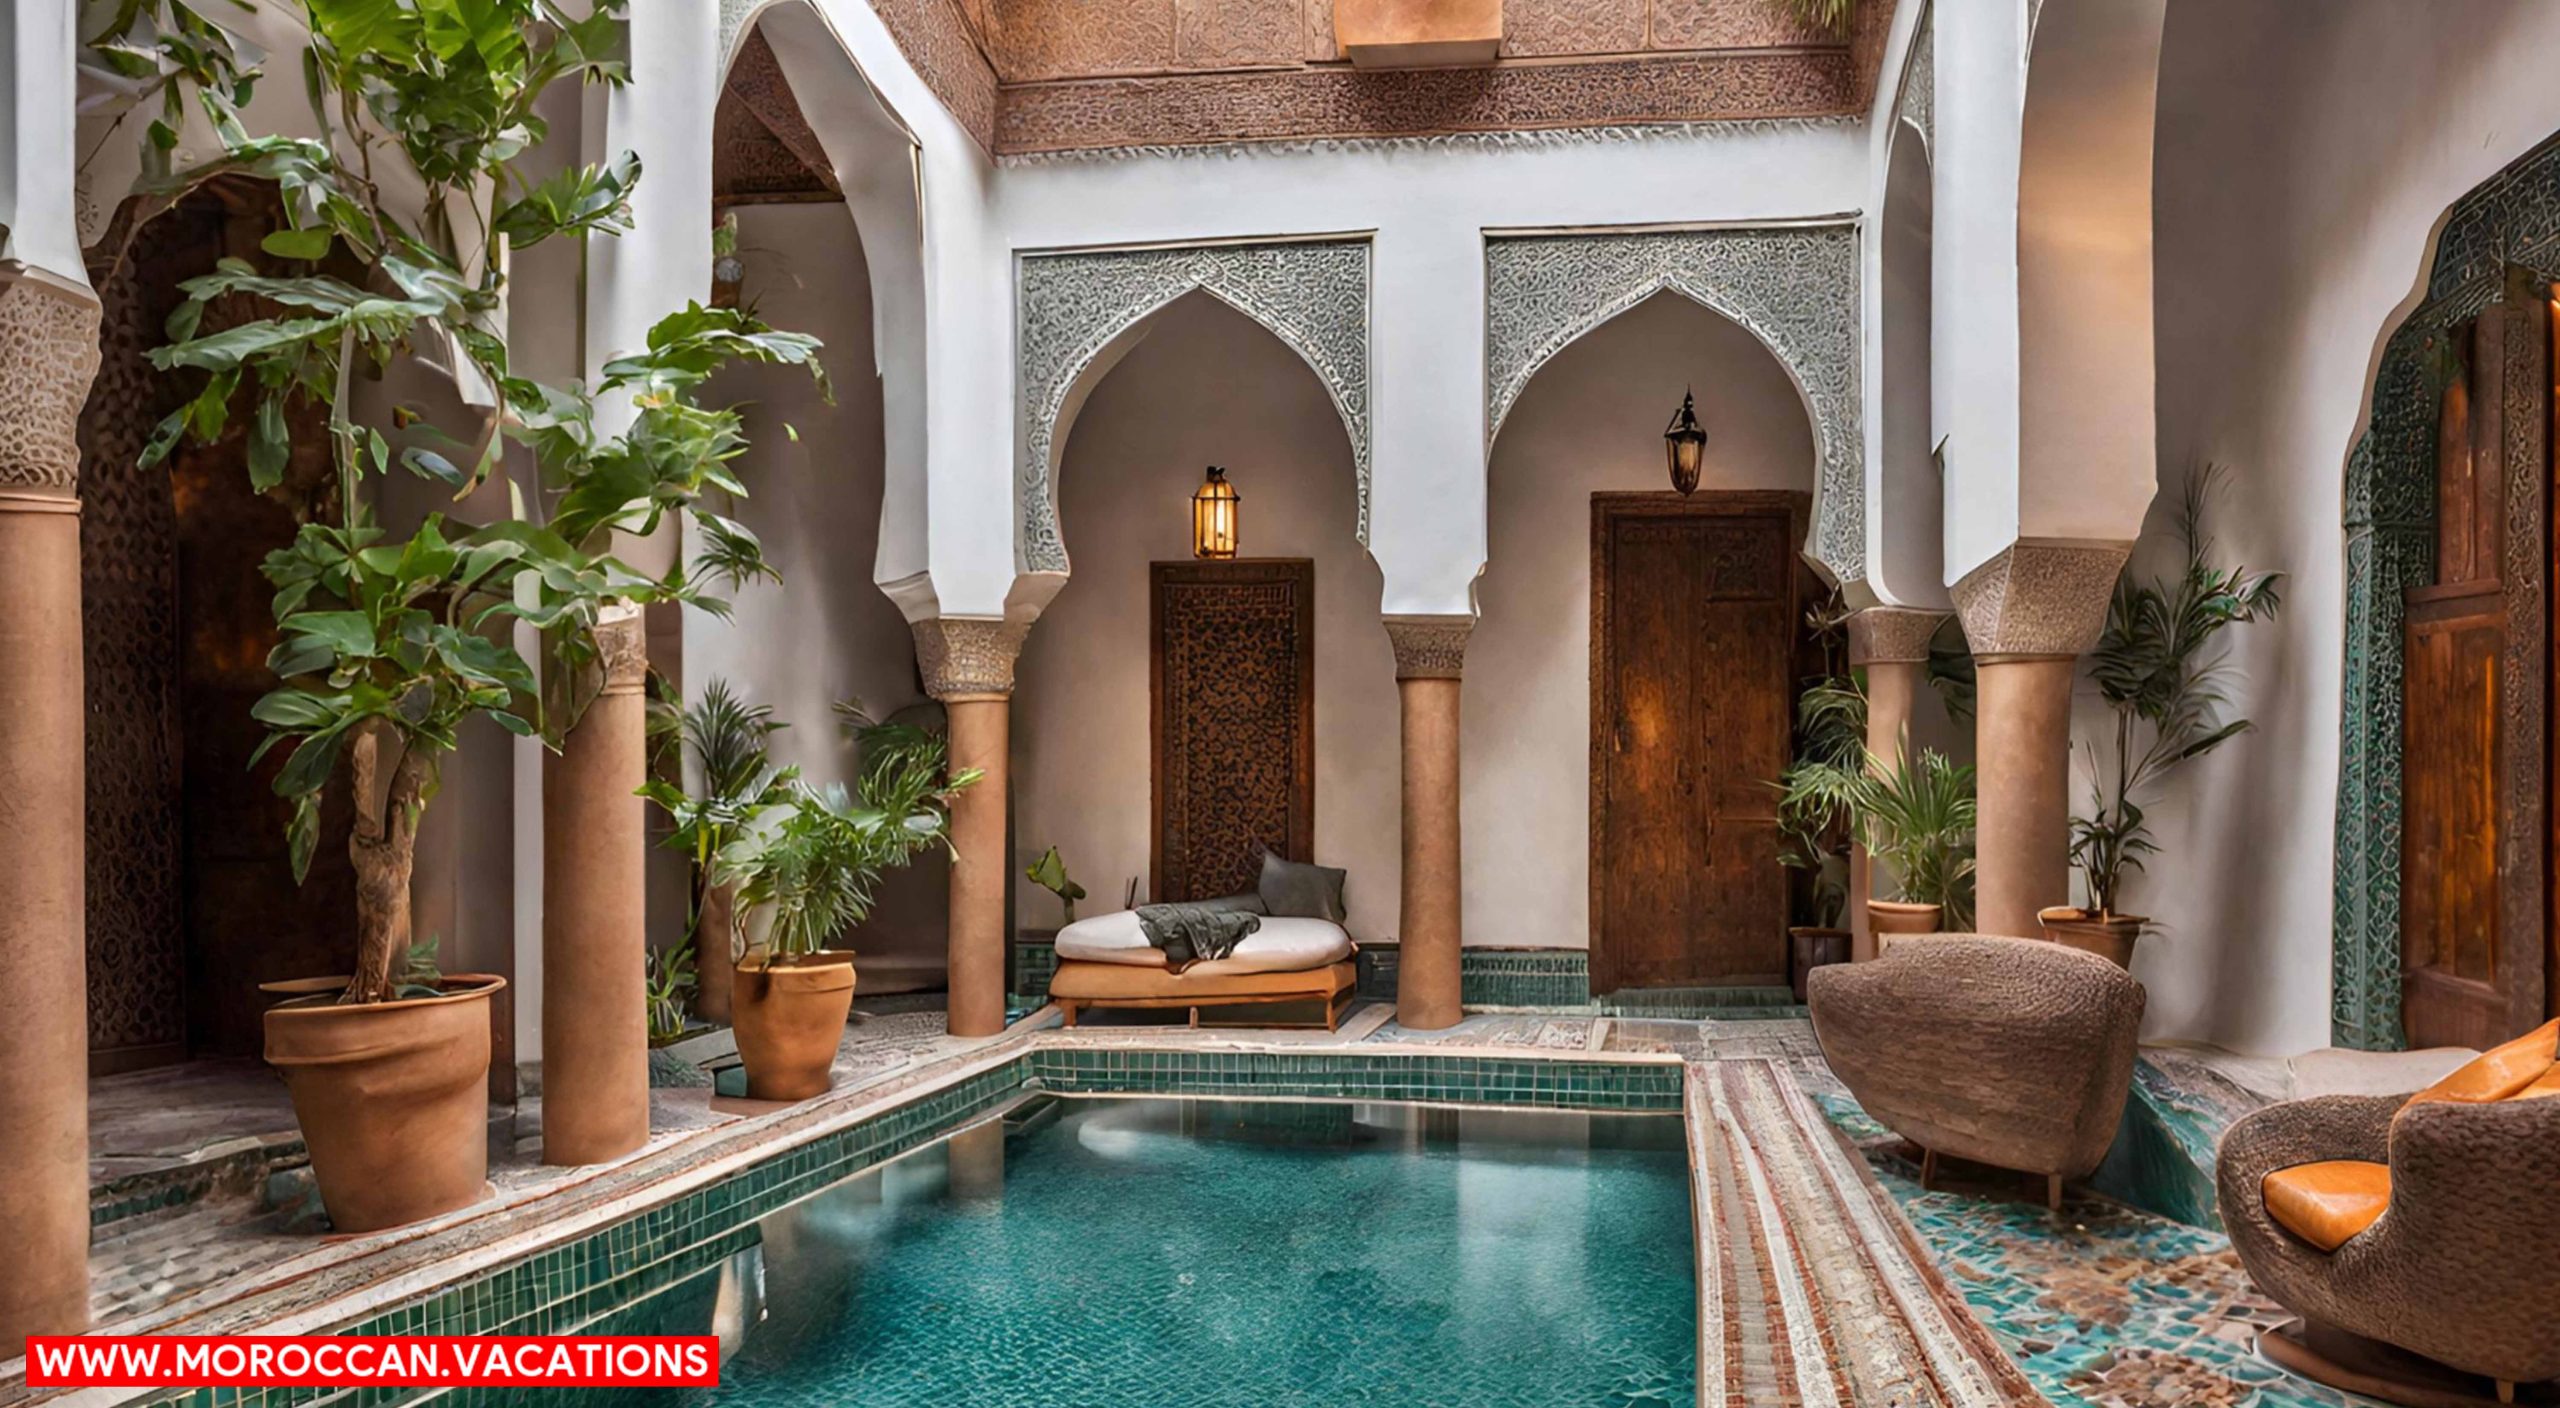 A stunning riad in Marrakesh, transformed into a luxurious guesthouse.